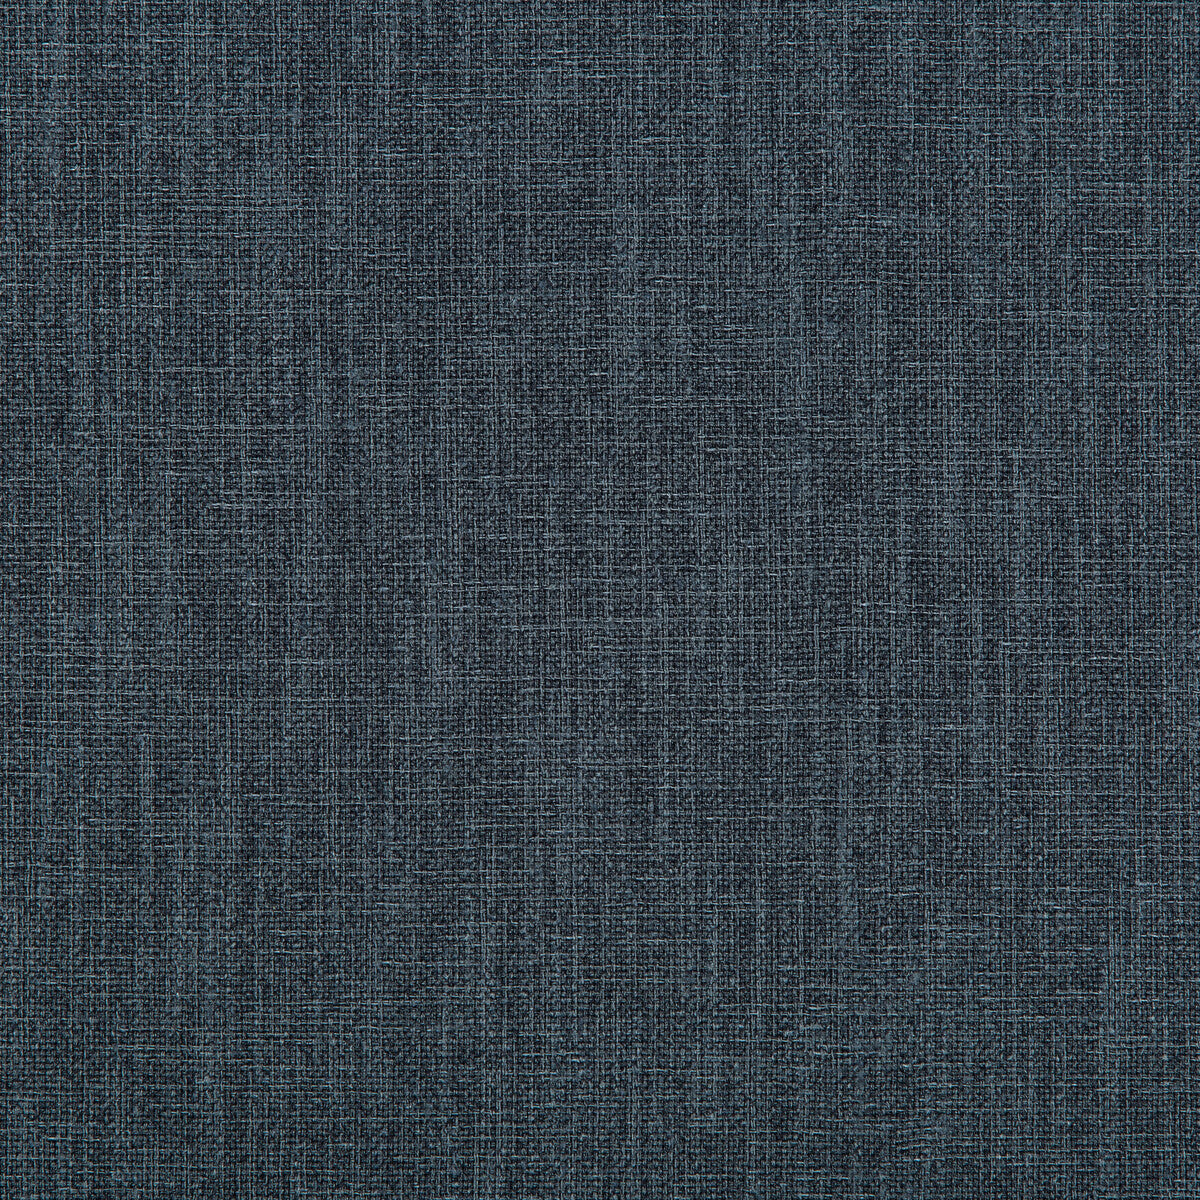 Kravet Contract fabric in 4644-50 color - pattern 4644.50.0 - by Kravet Contract